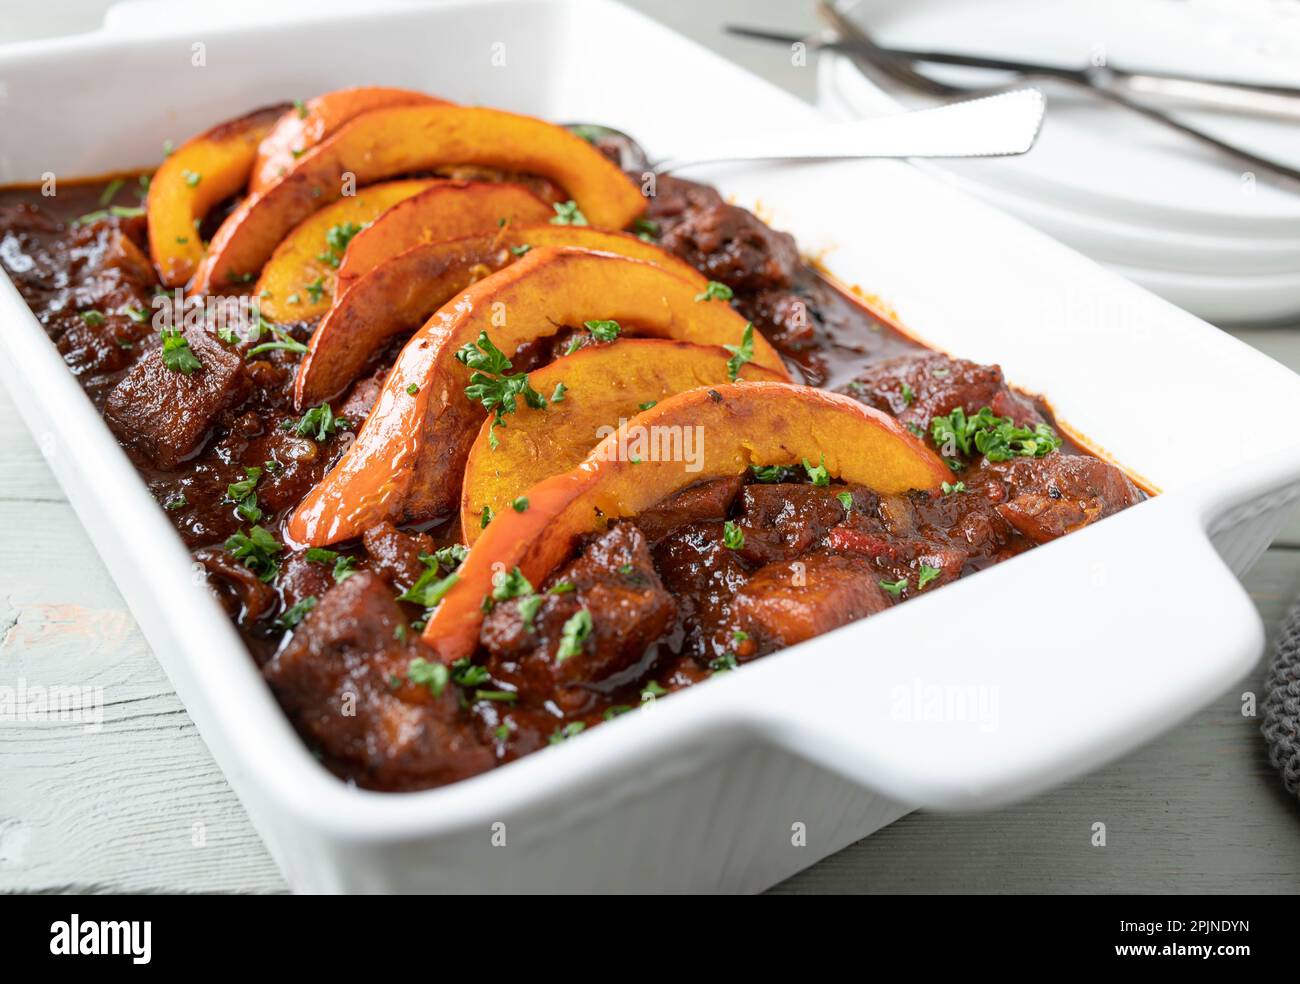 Poultry goulash cooked with low fat chicken breast. Served with roasted pumpkin topping Stock Photo